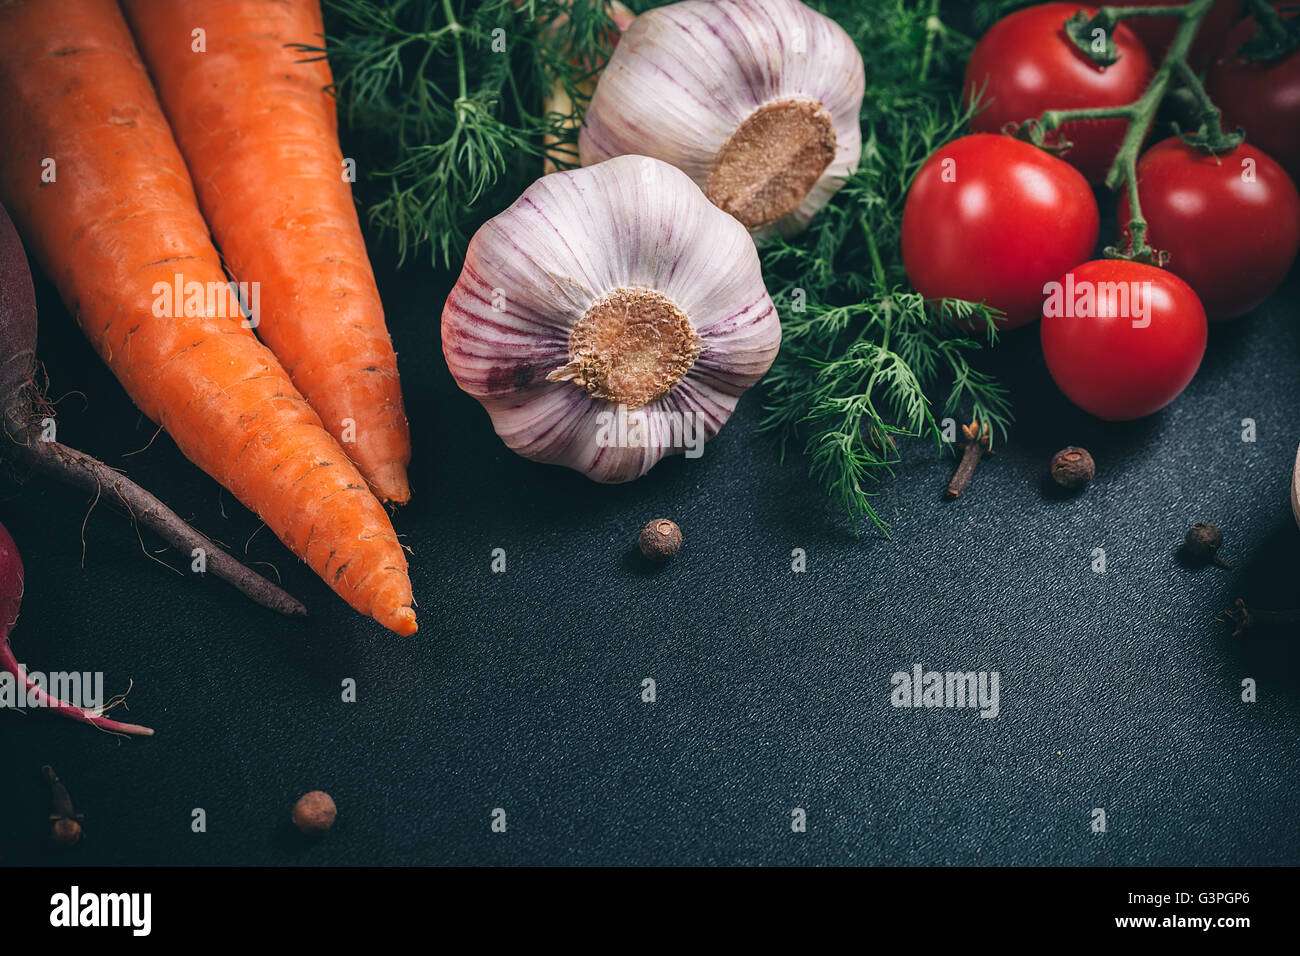 Beautiful background healthy organic eating. Studio photography the frame of different vegetables and mushrooms on vintage table Stock Photo